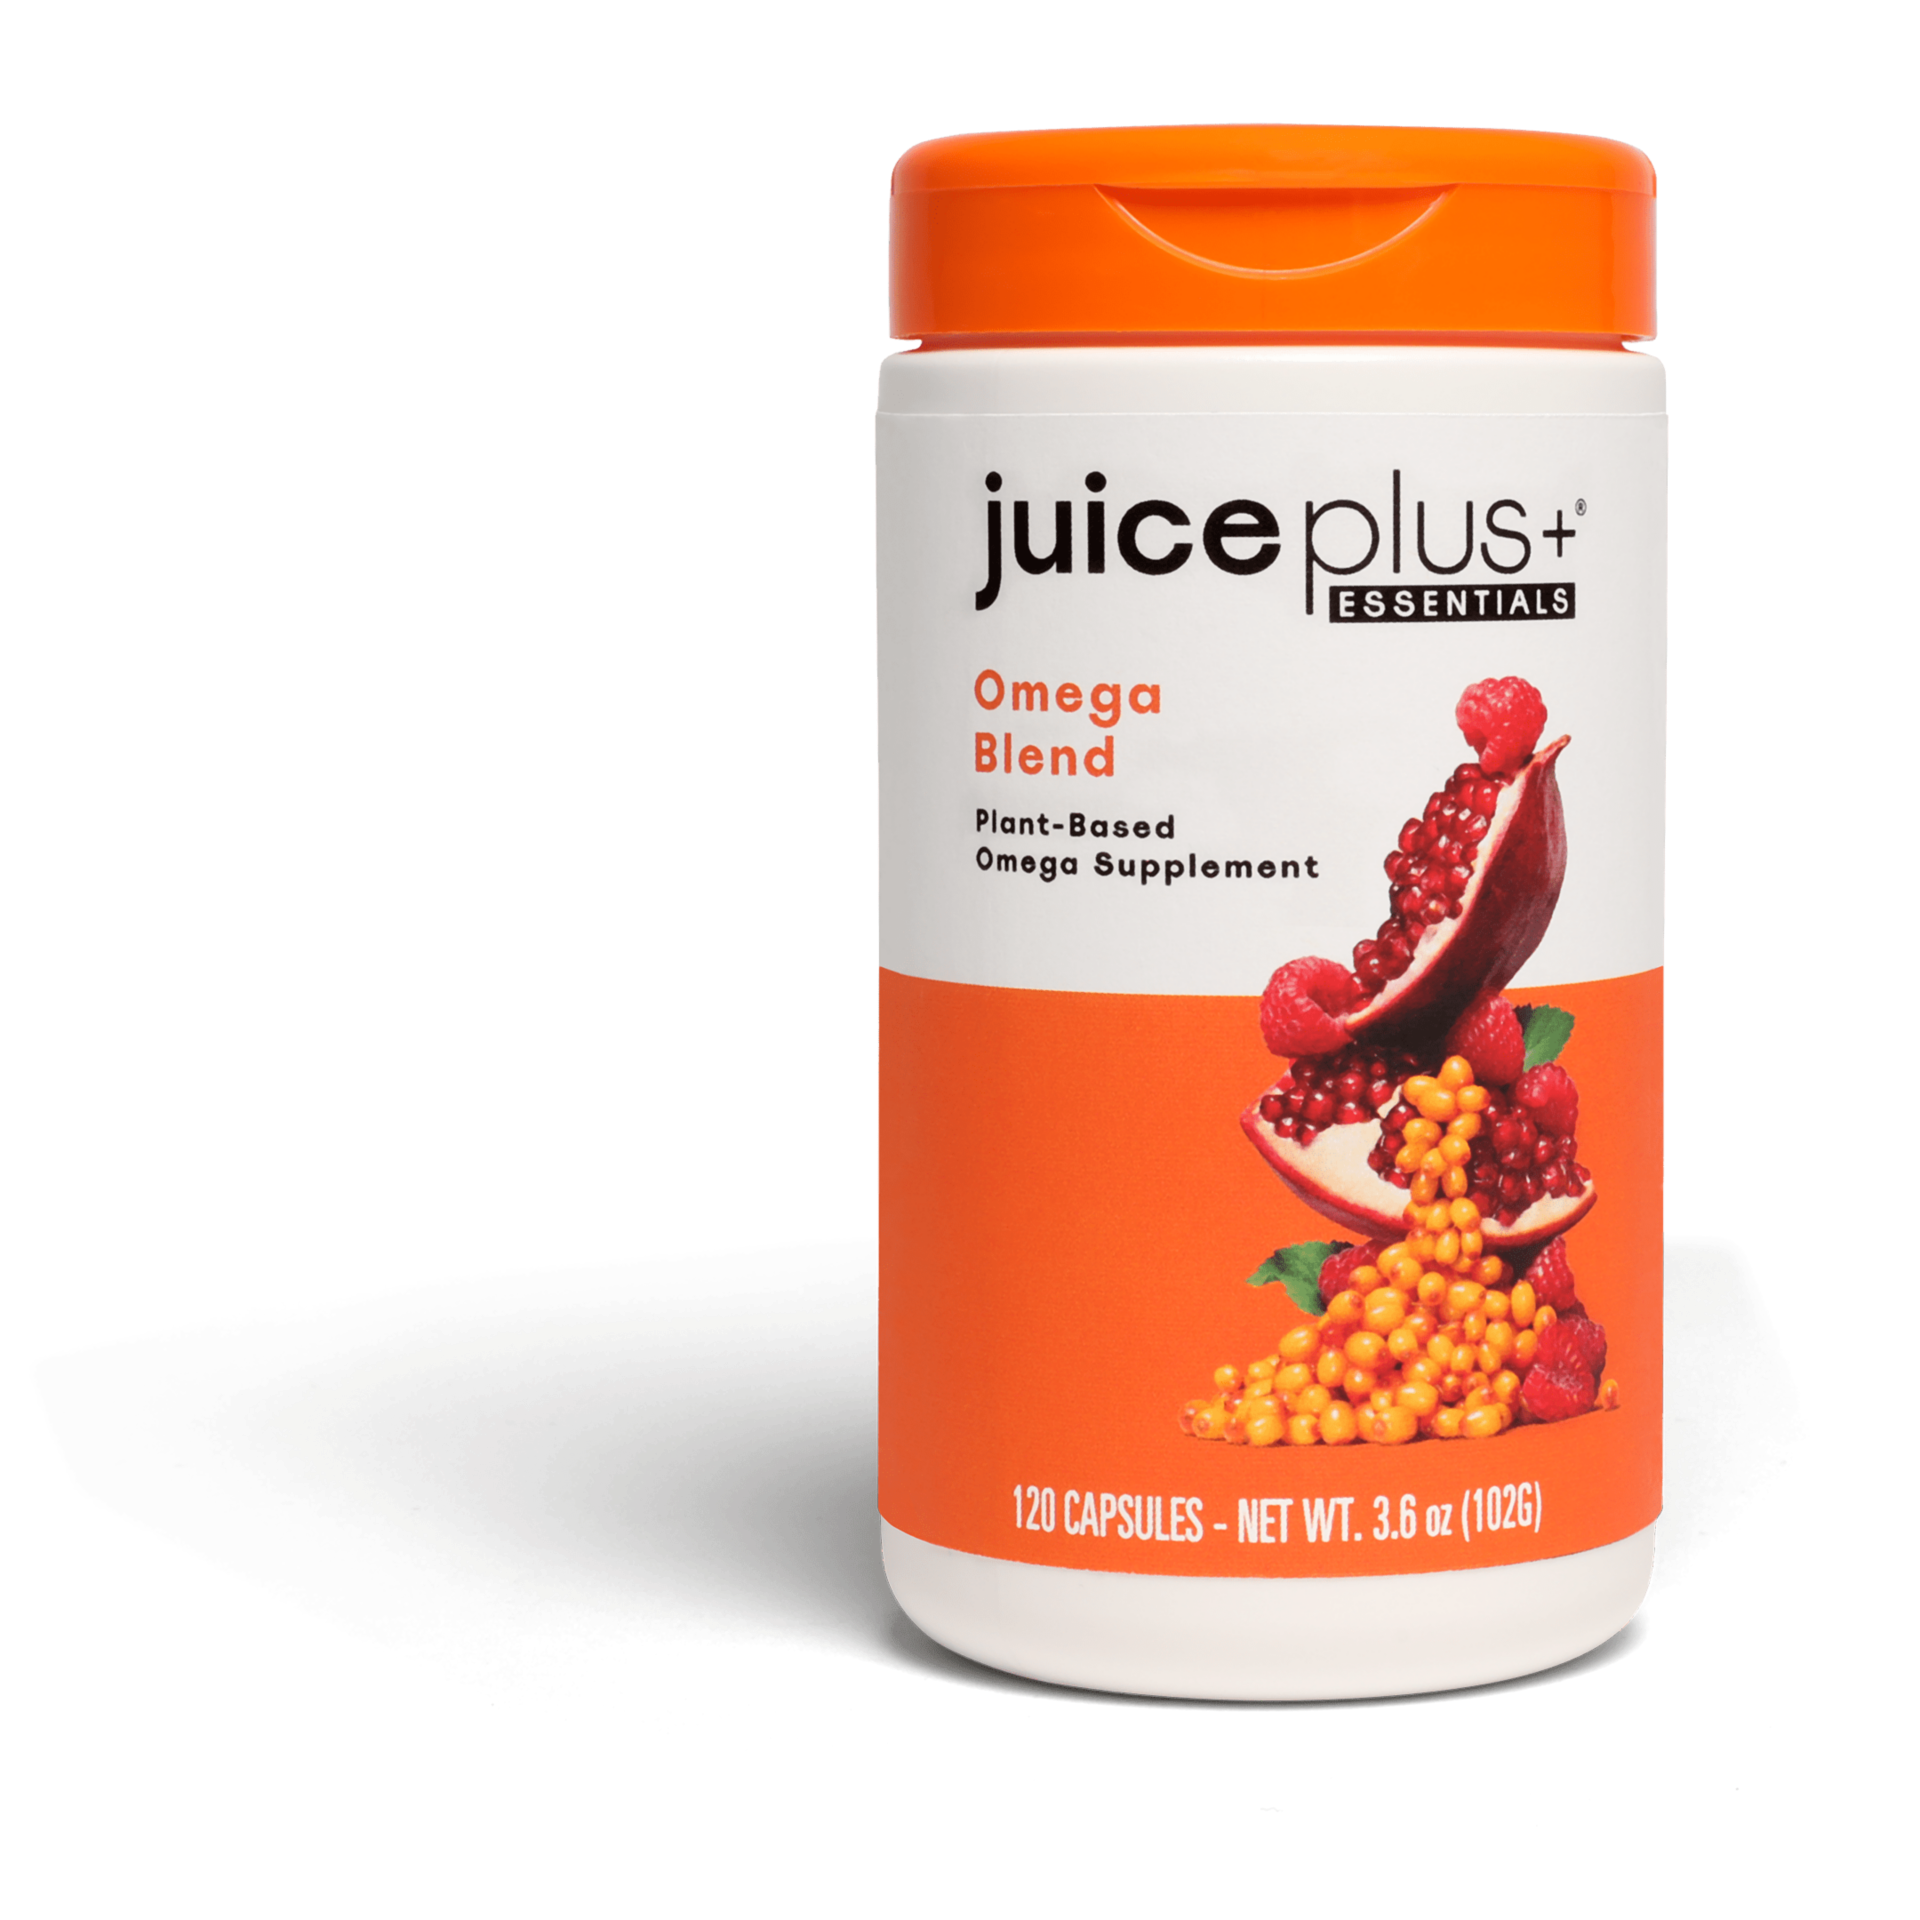 What is in Omega Blend from Juice Plus+?